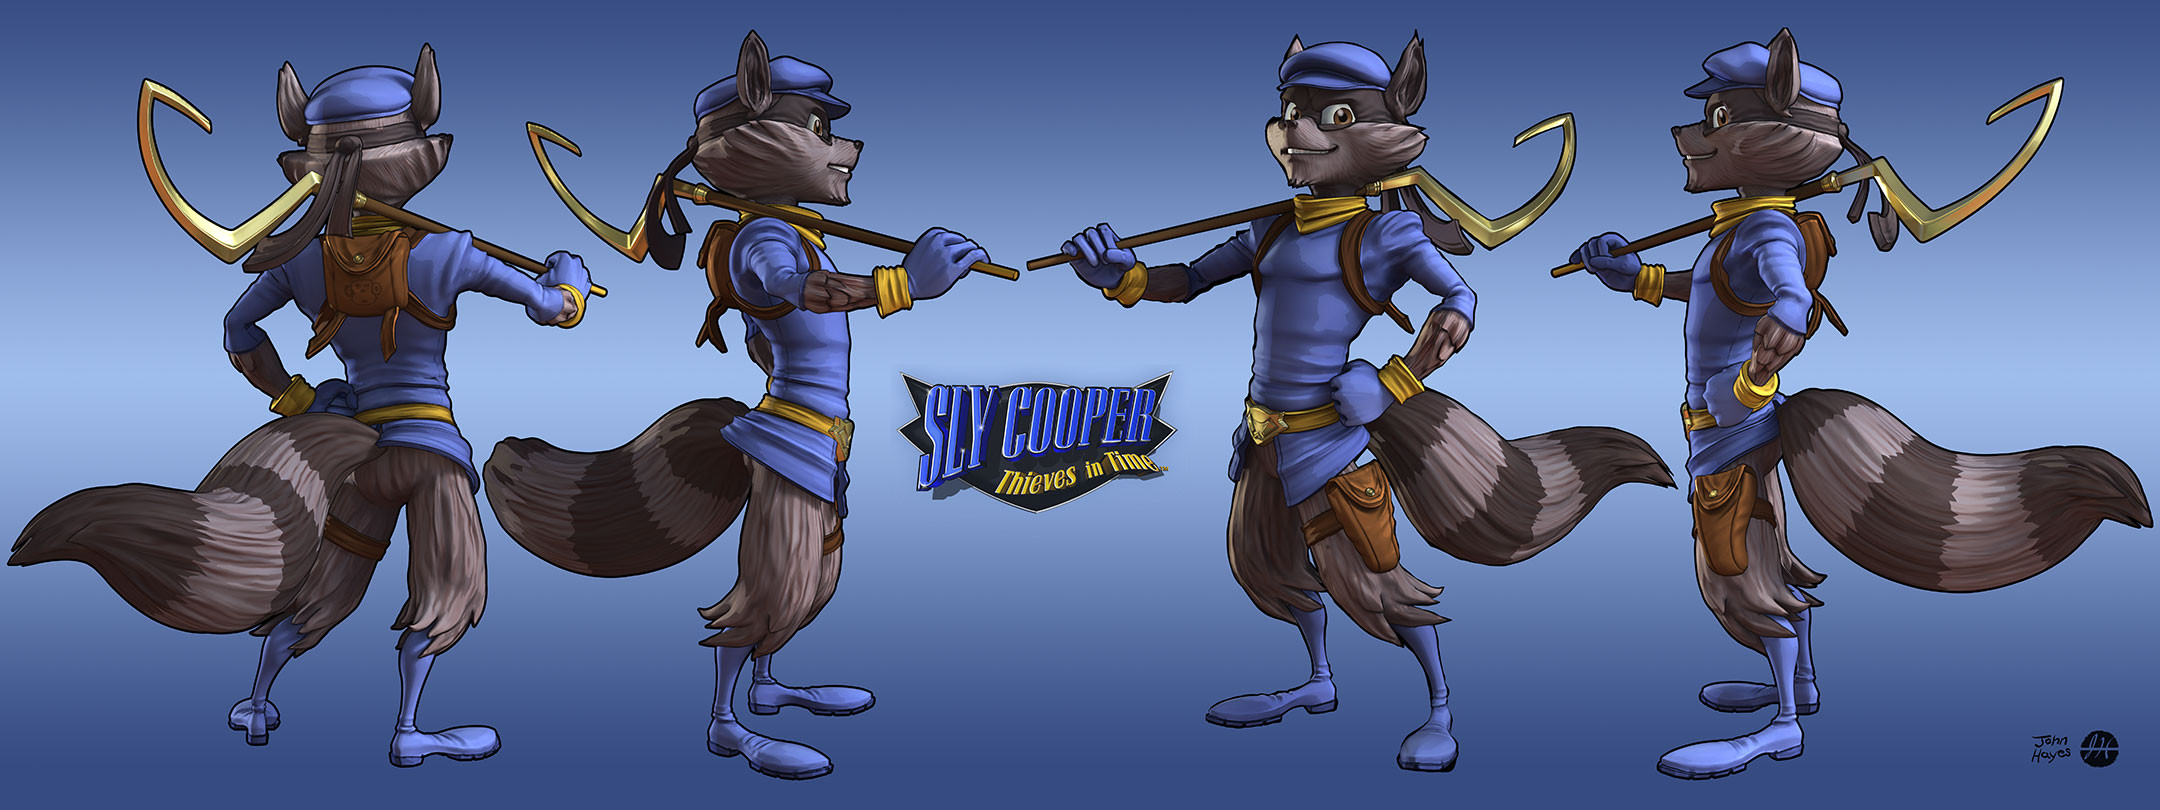 Sly Cooper: Thieves in Time animated short turns back the clock - Polygon